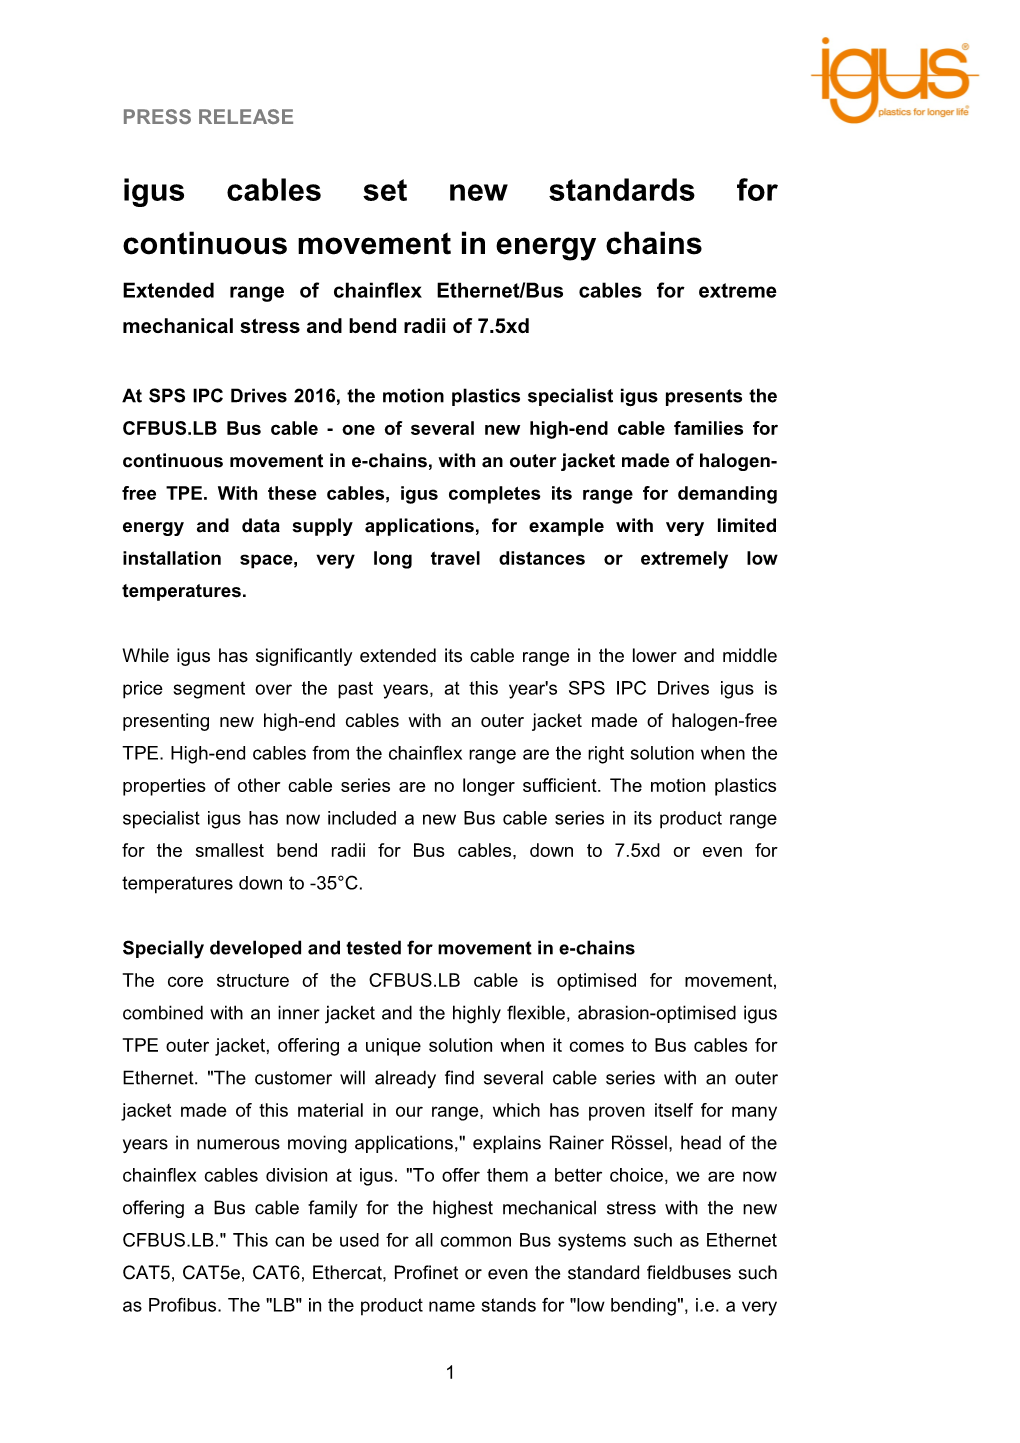 Igus Cables Set New Standards for Continuous Movement in Energy Chains